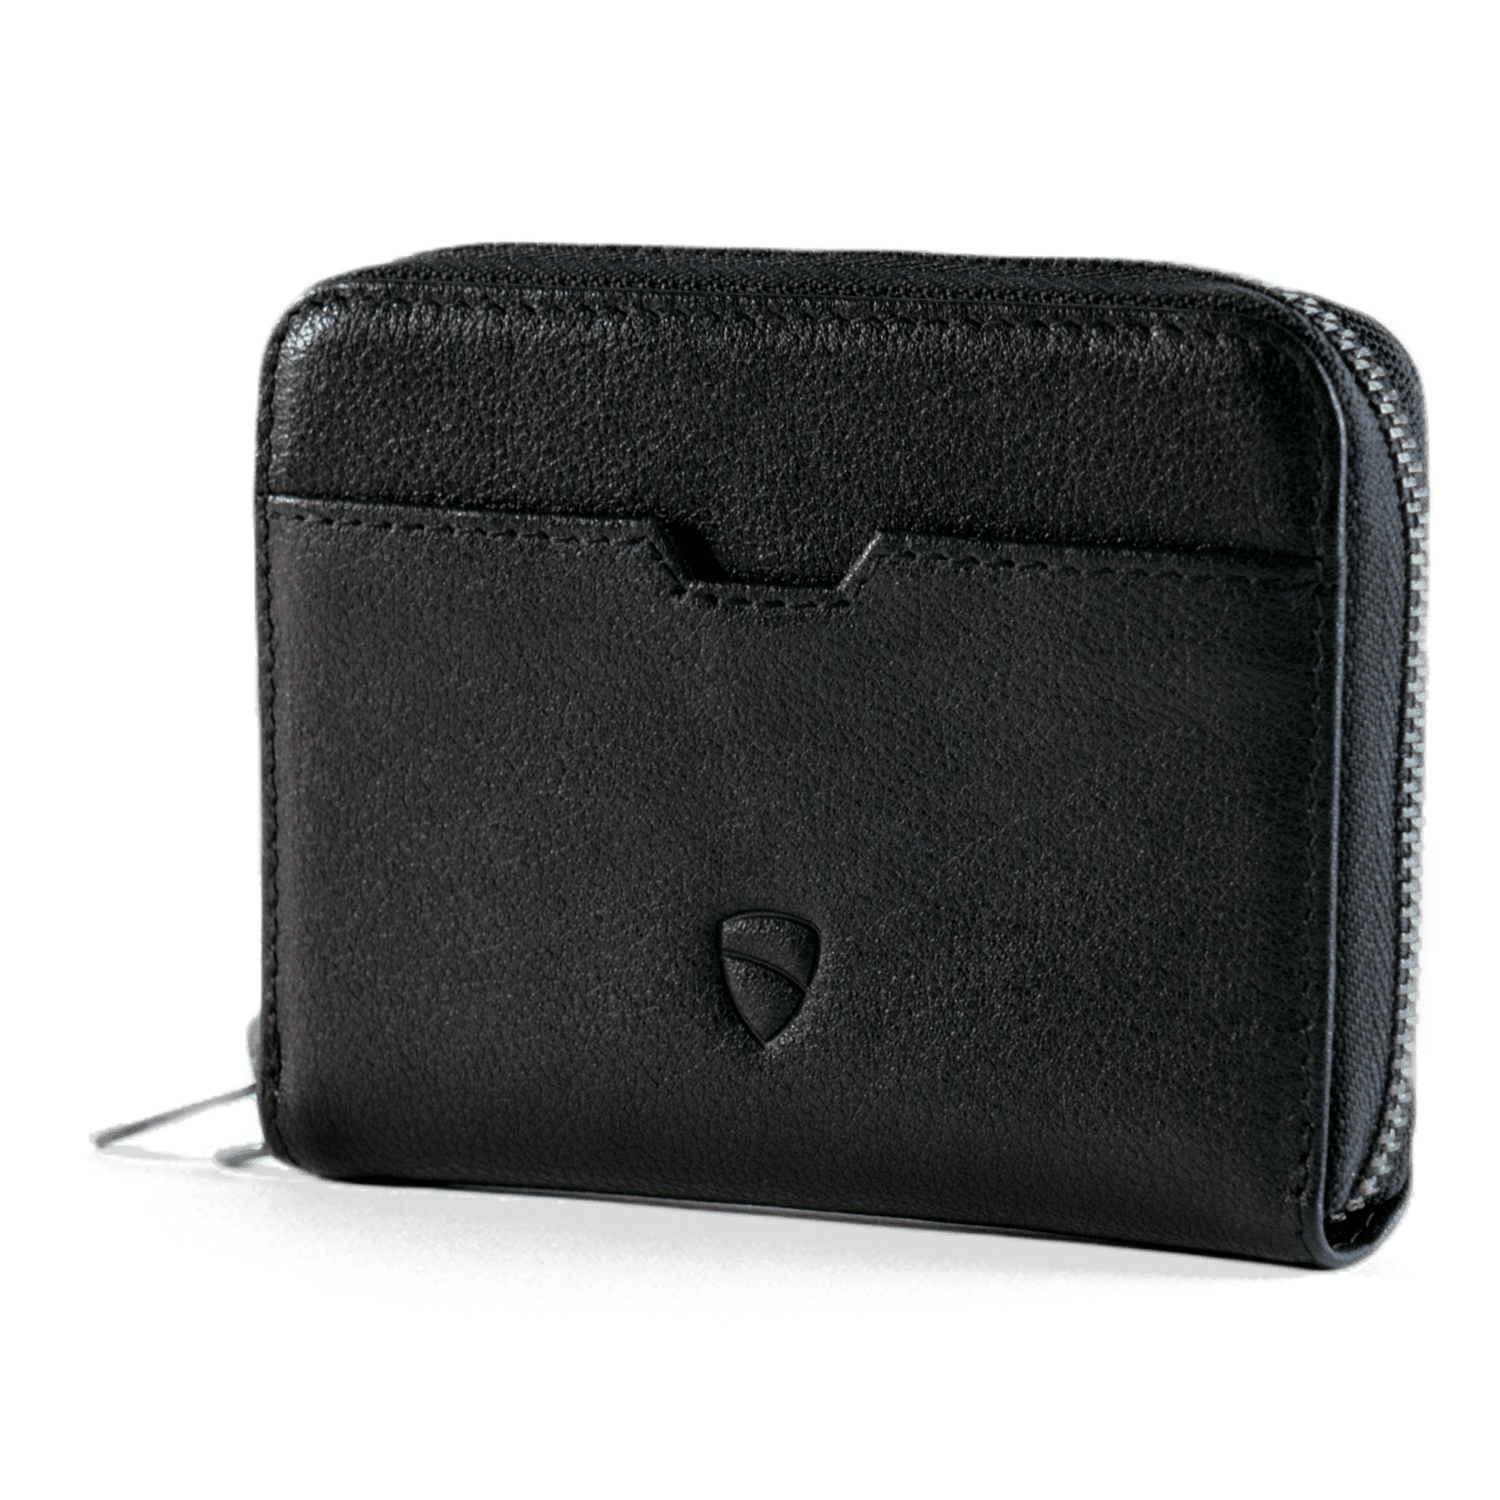 Vaultskin Notting Hill Slim Zip Wallet with RFID, Black, Size One Size